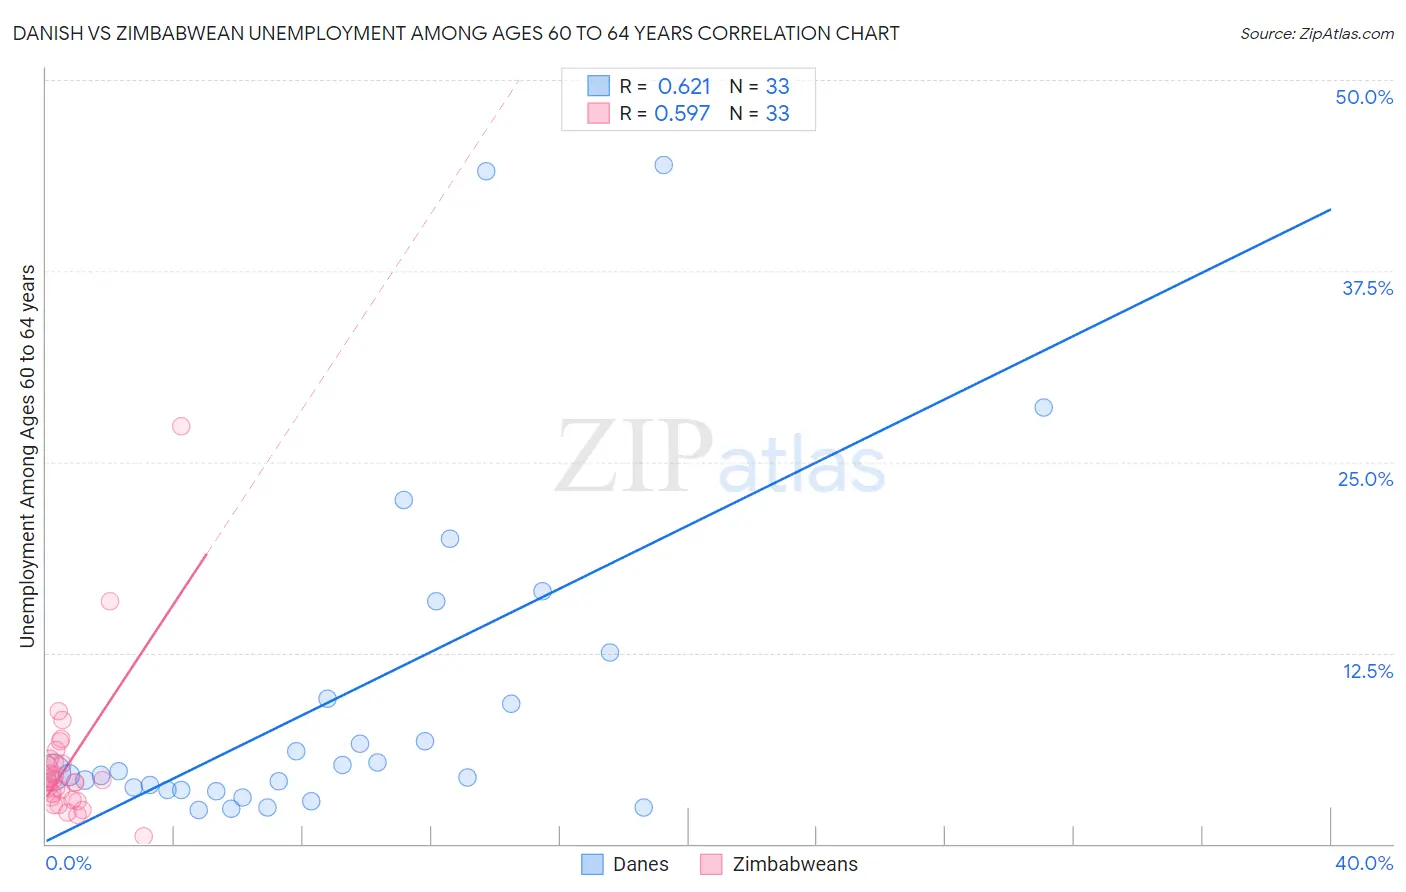 Danish vs Zimbabwean Unemployment Among Ages 60 to 64 years